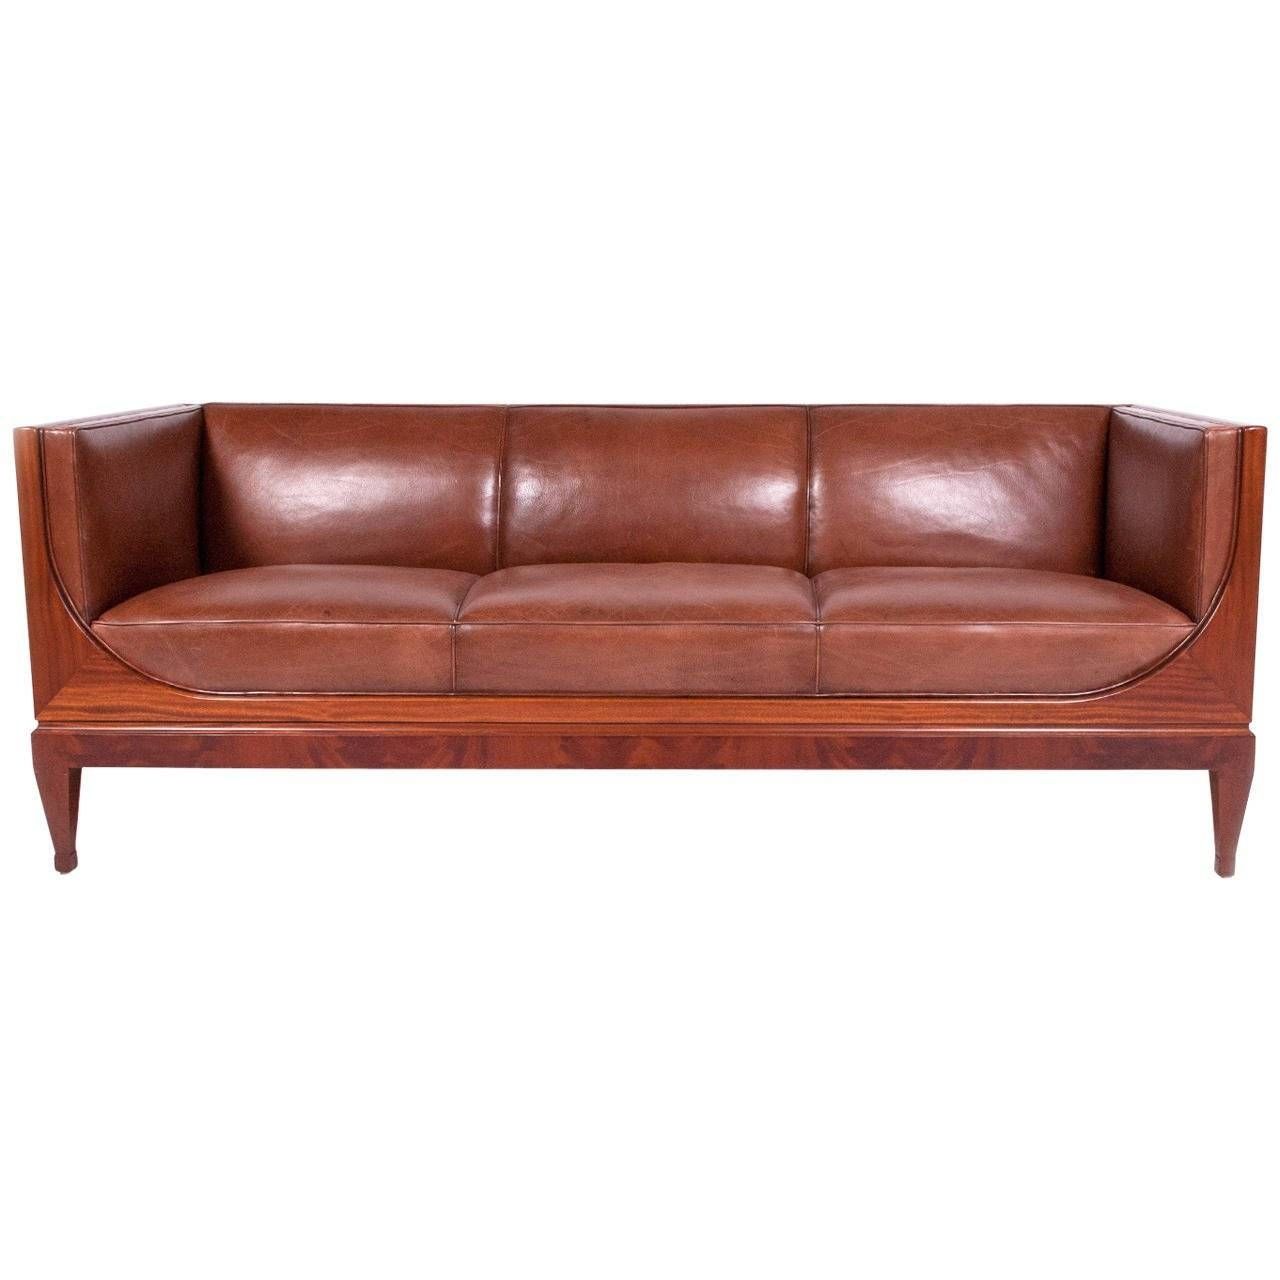 Classic Sofafrits Henningsen, 1930s For Sale At 1stdibs Throughout 1930s Couch (Photo 173 of 299)